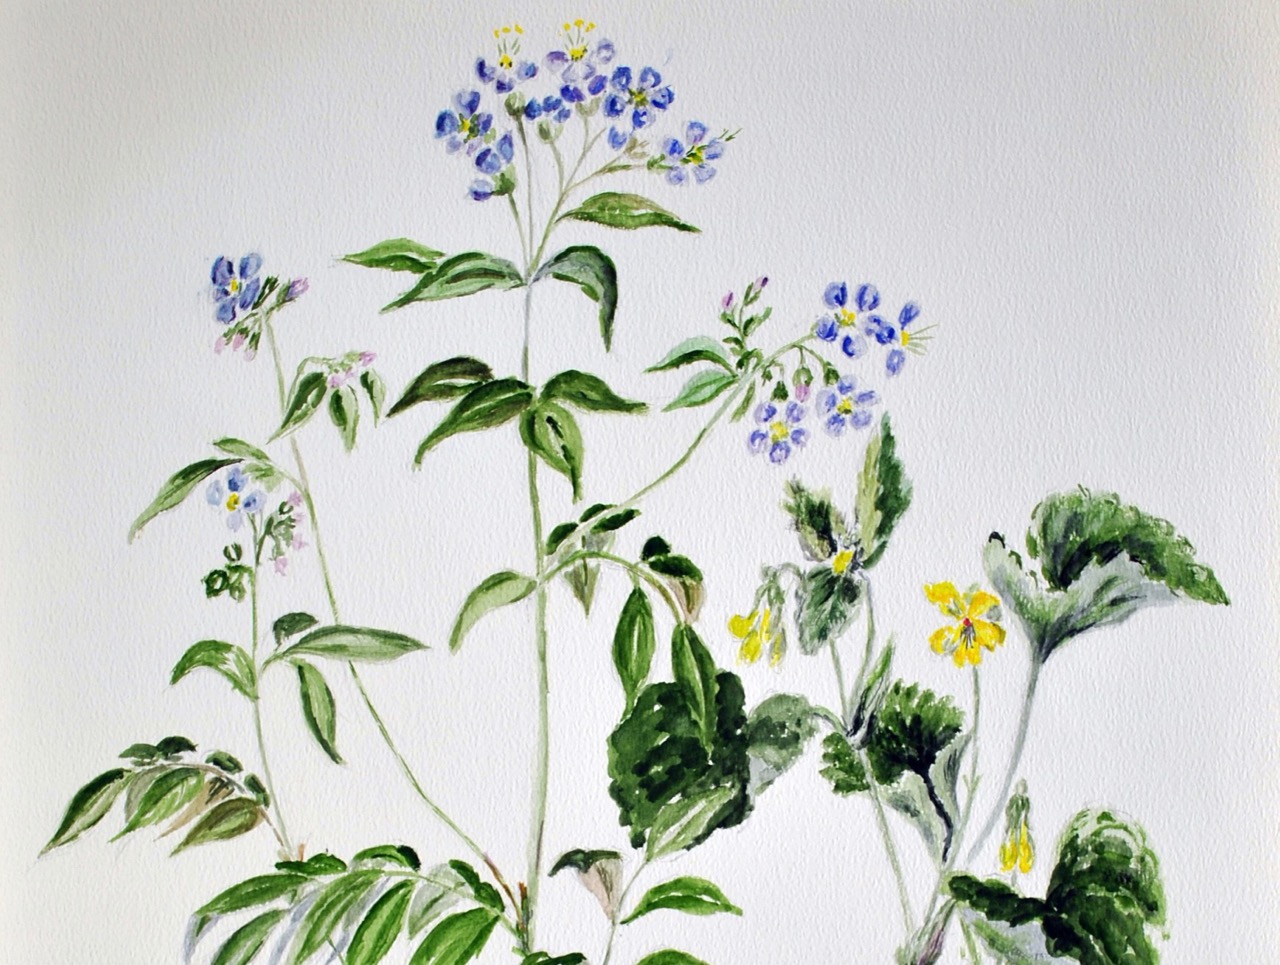 Watercolor wildflowers on display at CCAC in November